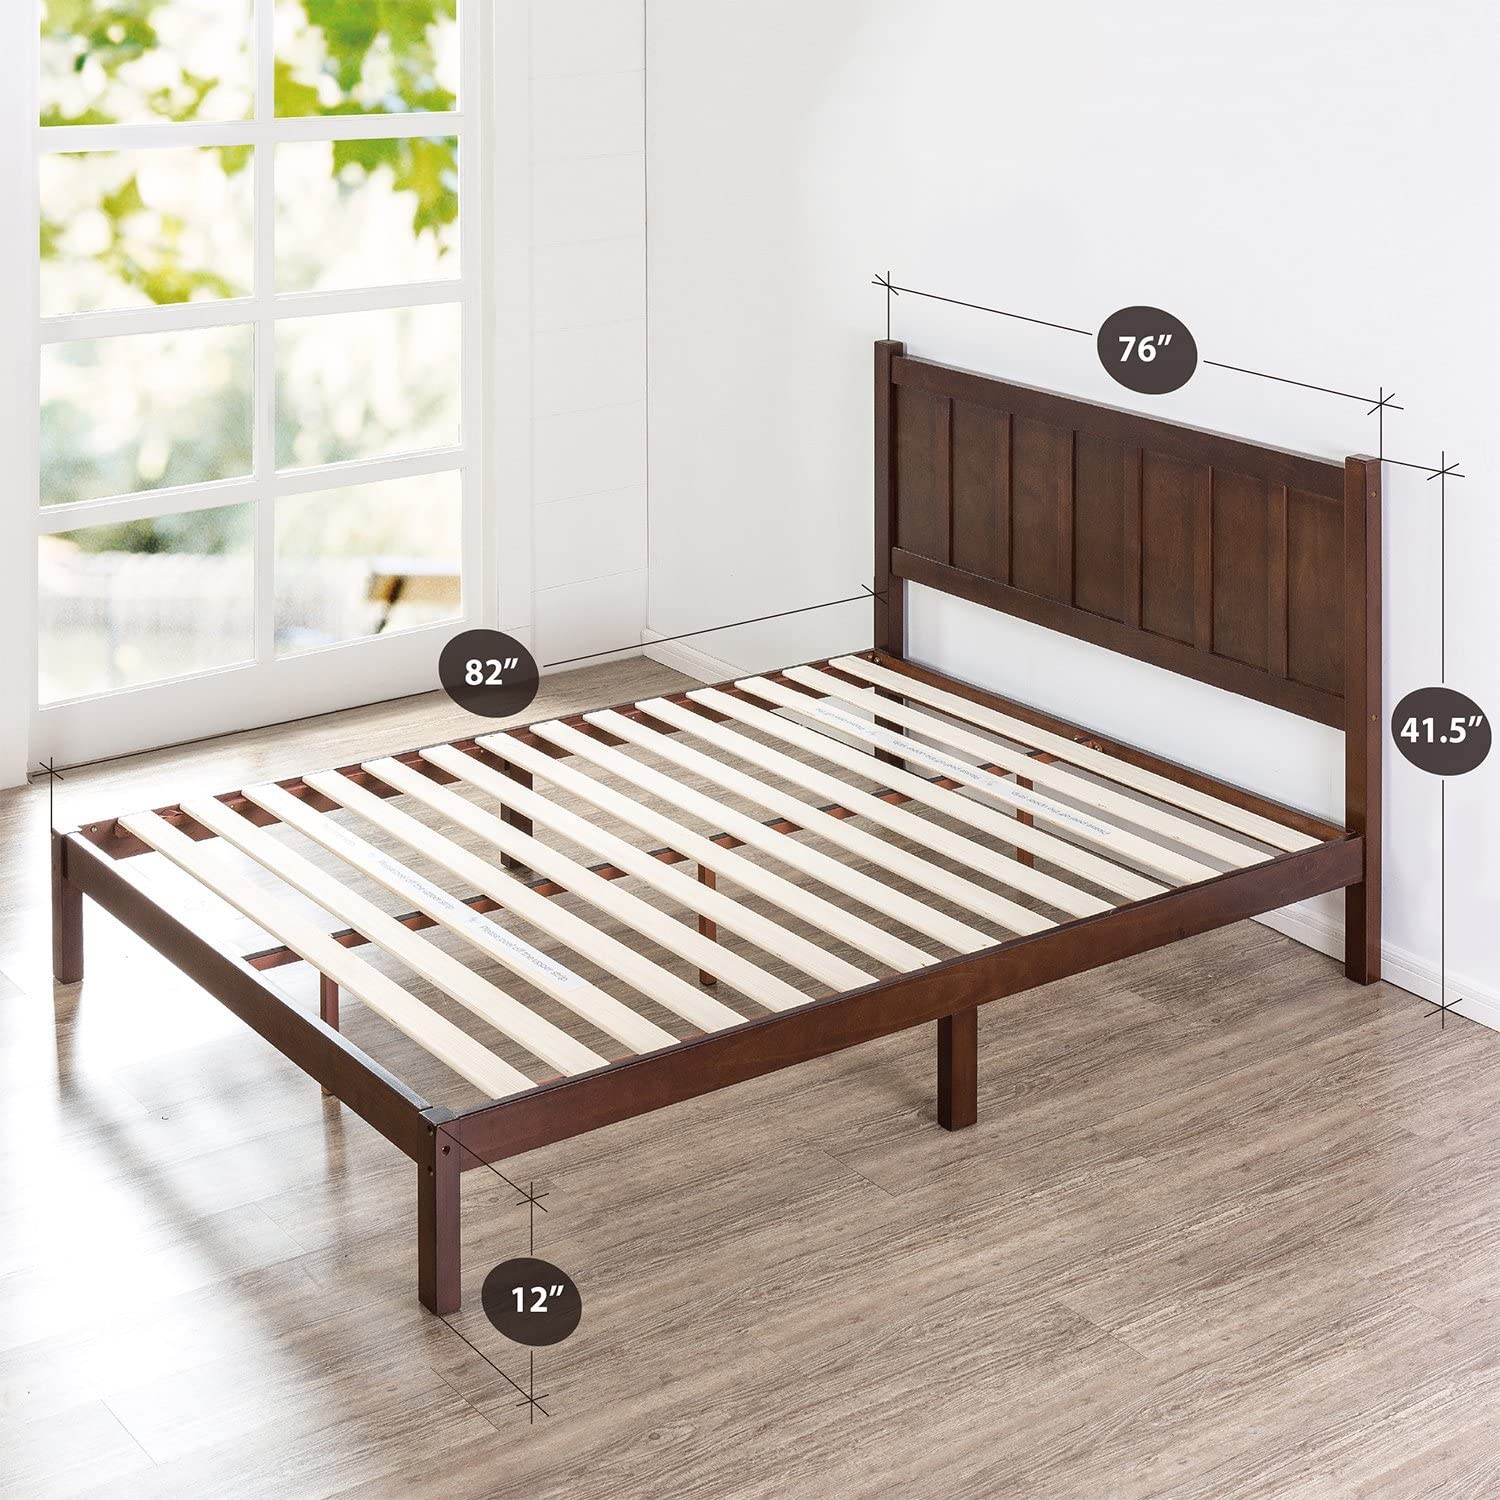 Zinus Adrian Wood Rustic Style Platform Bed with Headboard / No Box Spring Needed / Wood Slat Support, King, Only $249.99, You Save $132.00 (35%)